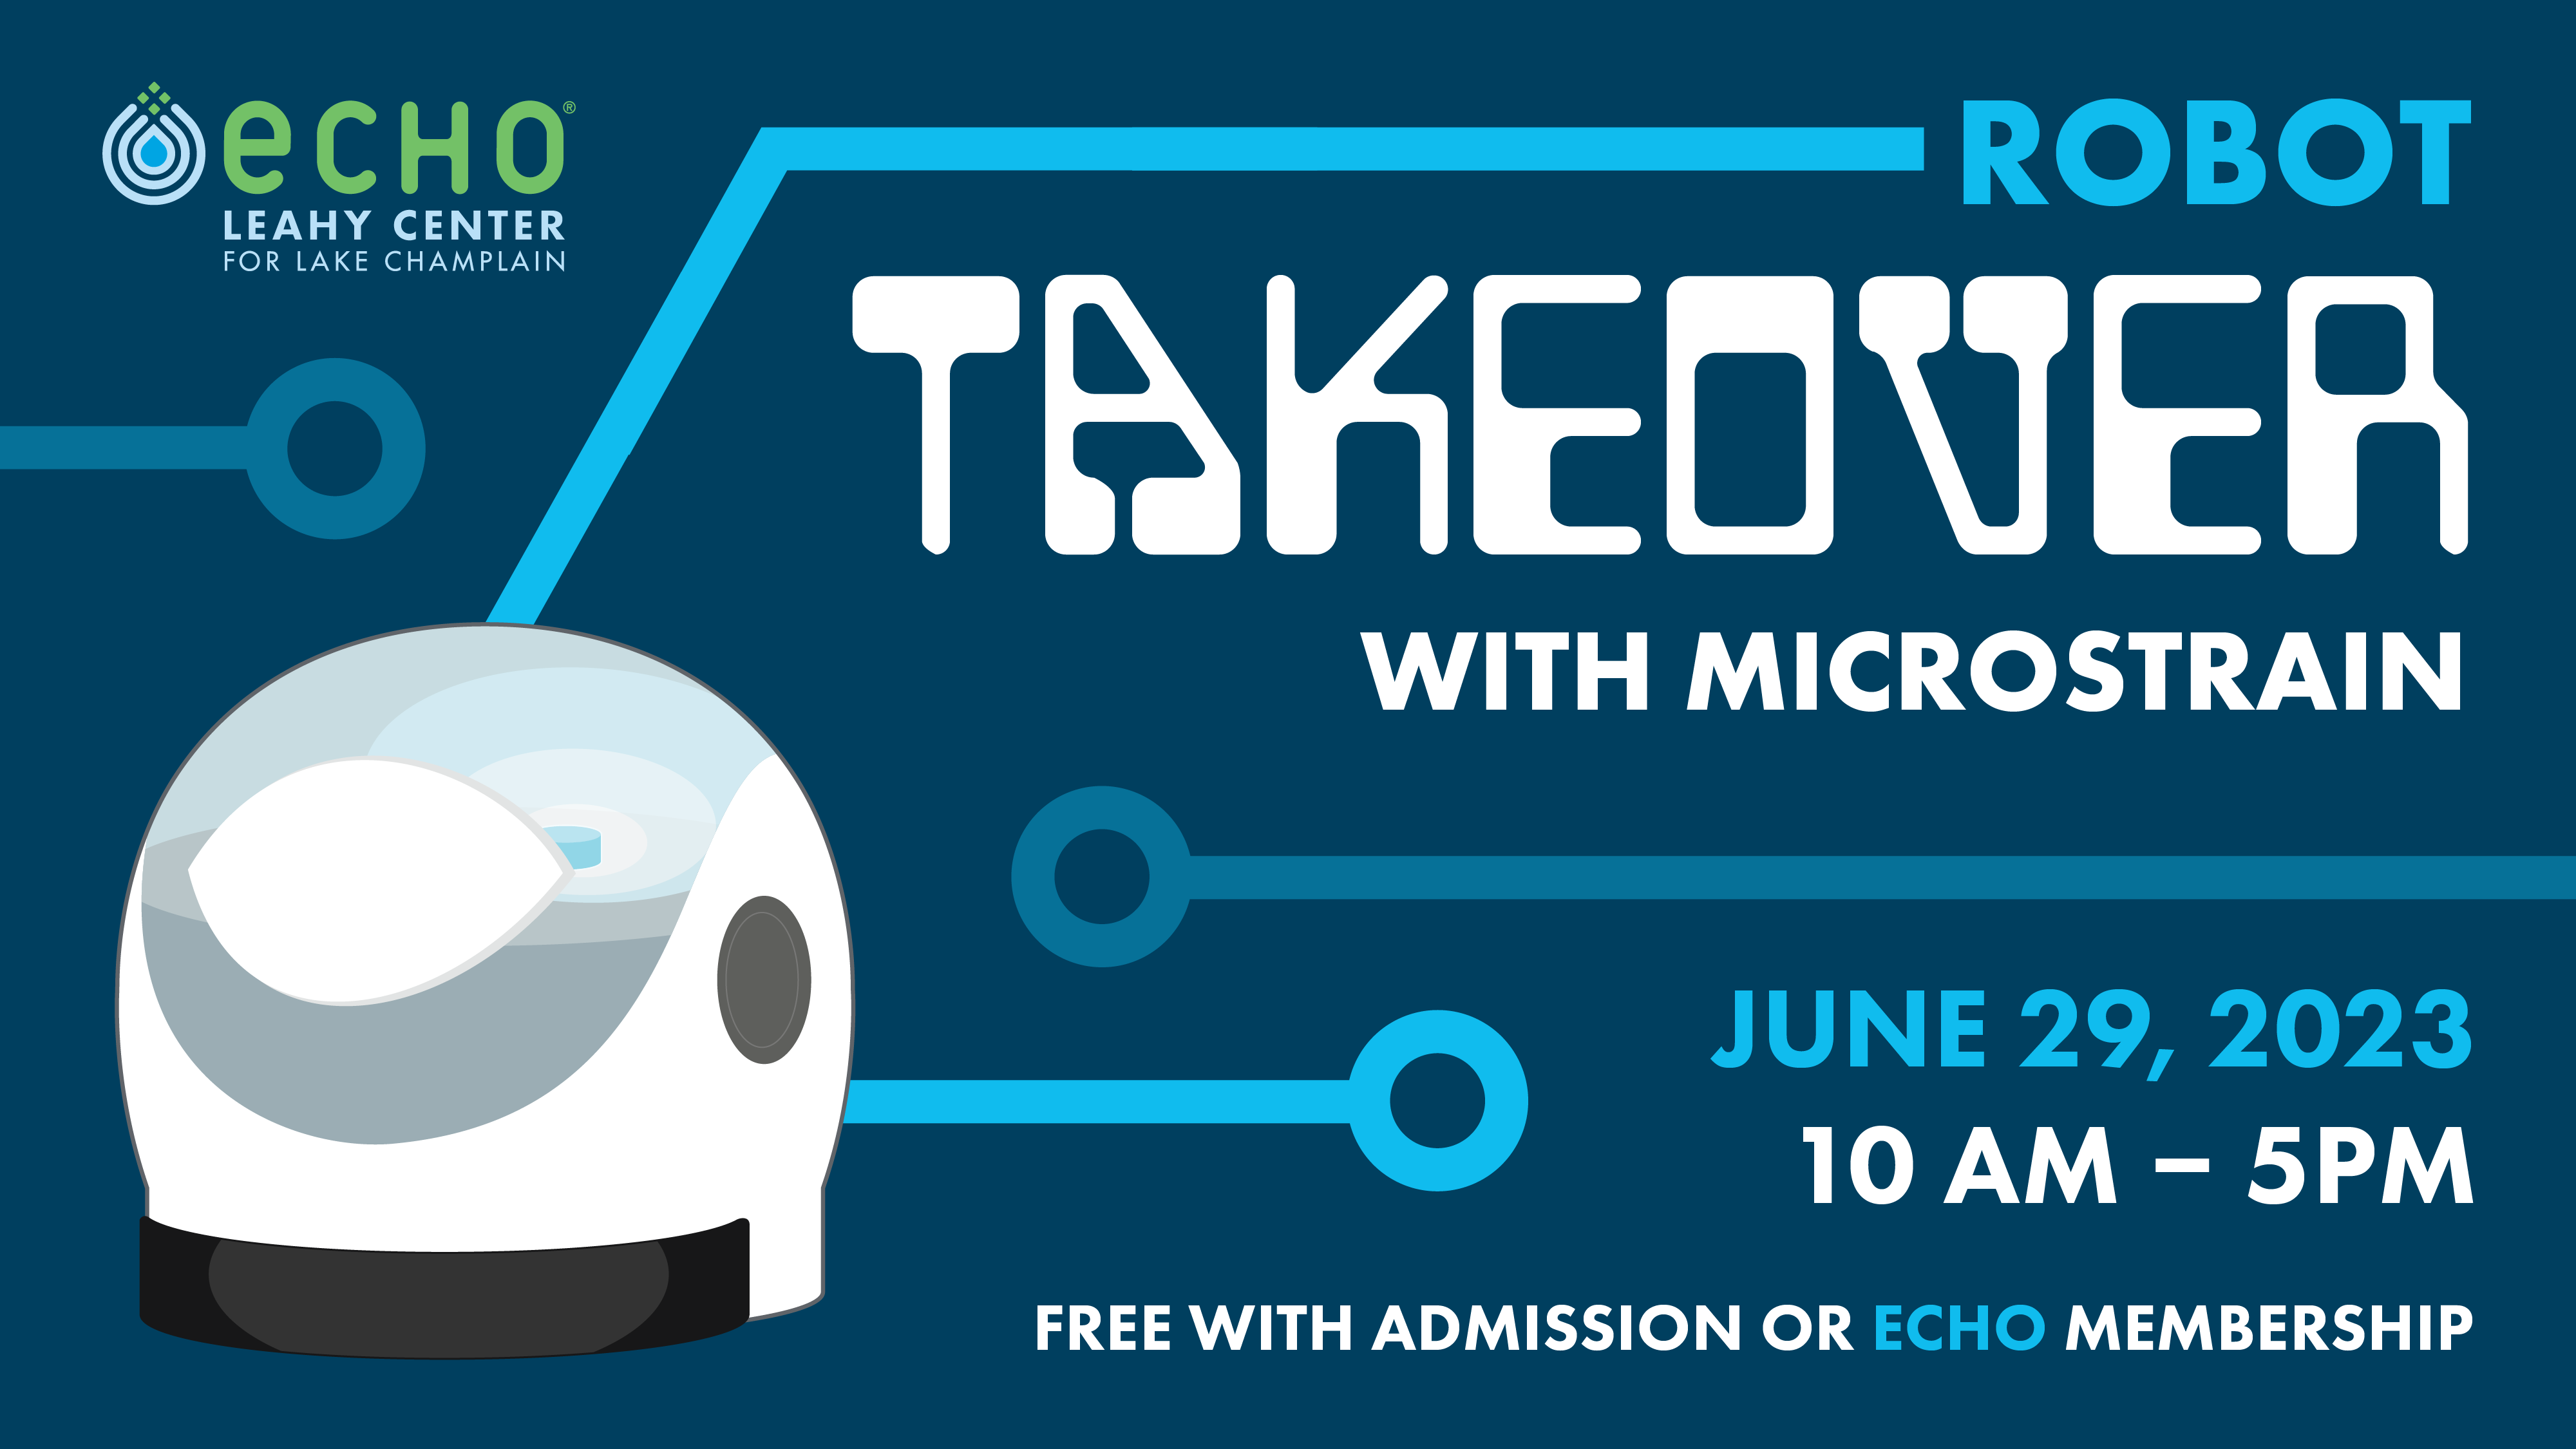 Navy blue graphic with vector illustration of round white robot. Bold text reads ROBOT TAKEOVER WITH MICROSTRAIN, June 29, 2023 10am-5pm, Free with admission or ECHO membership.